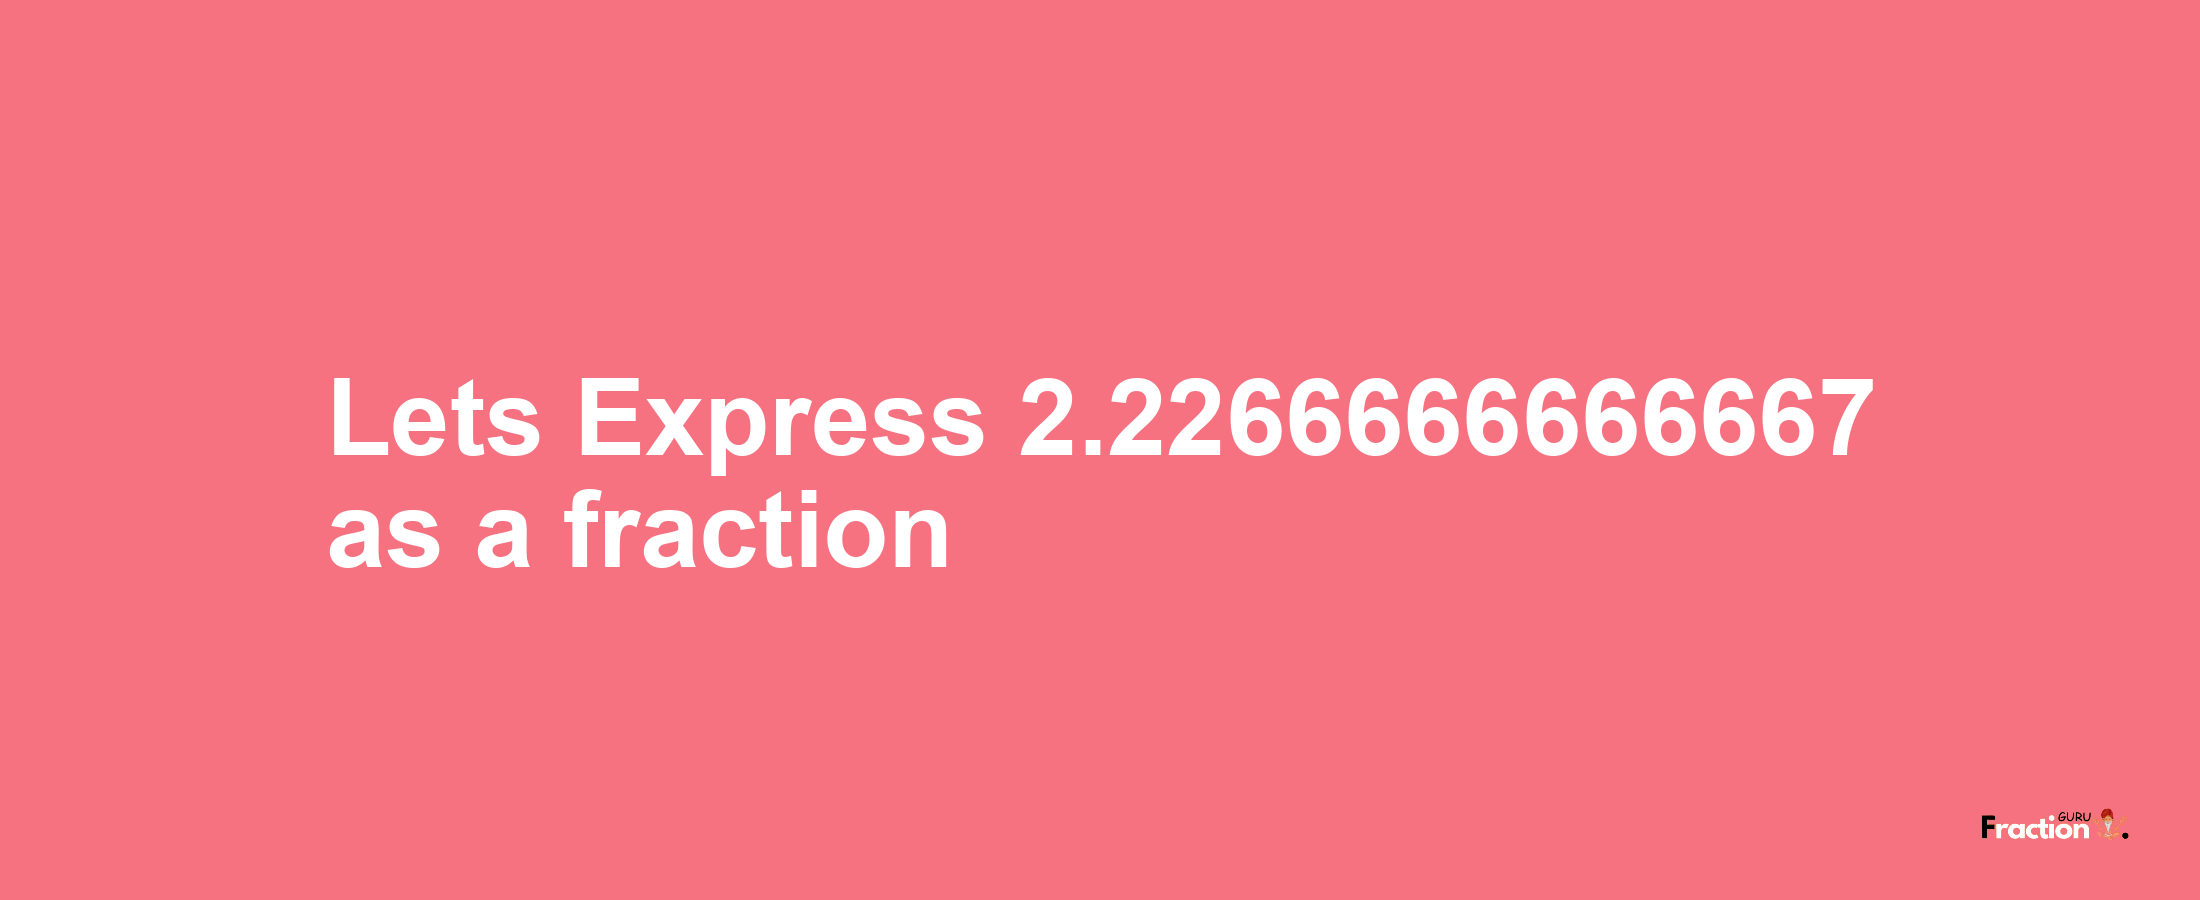 Lets Express 2.2266666666667 as afraction